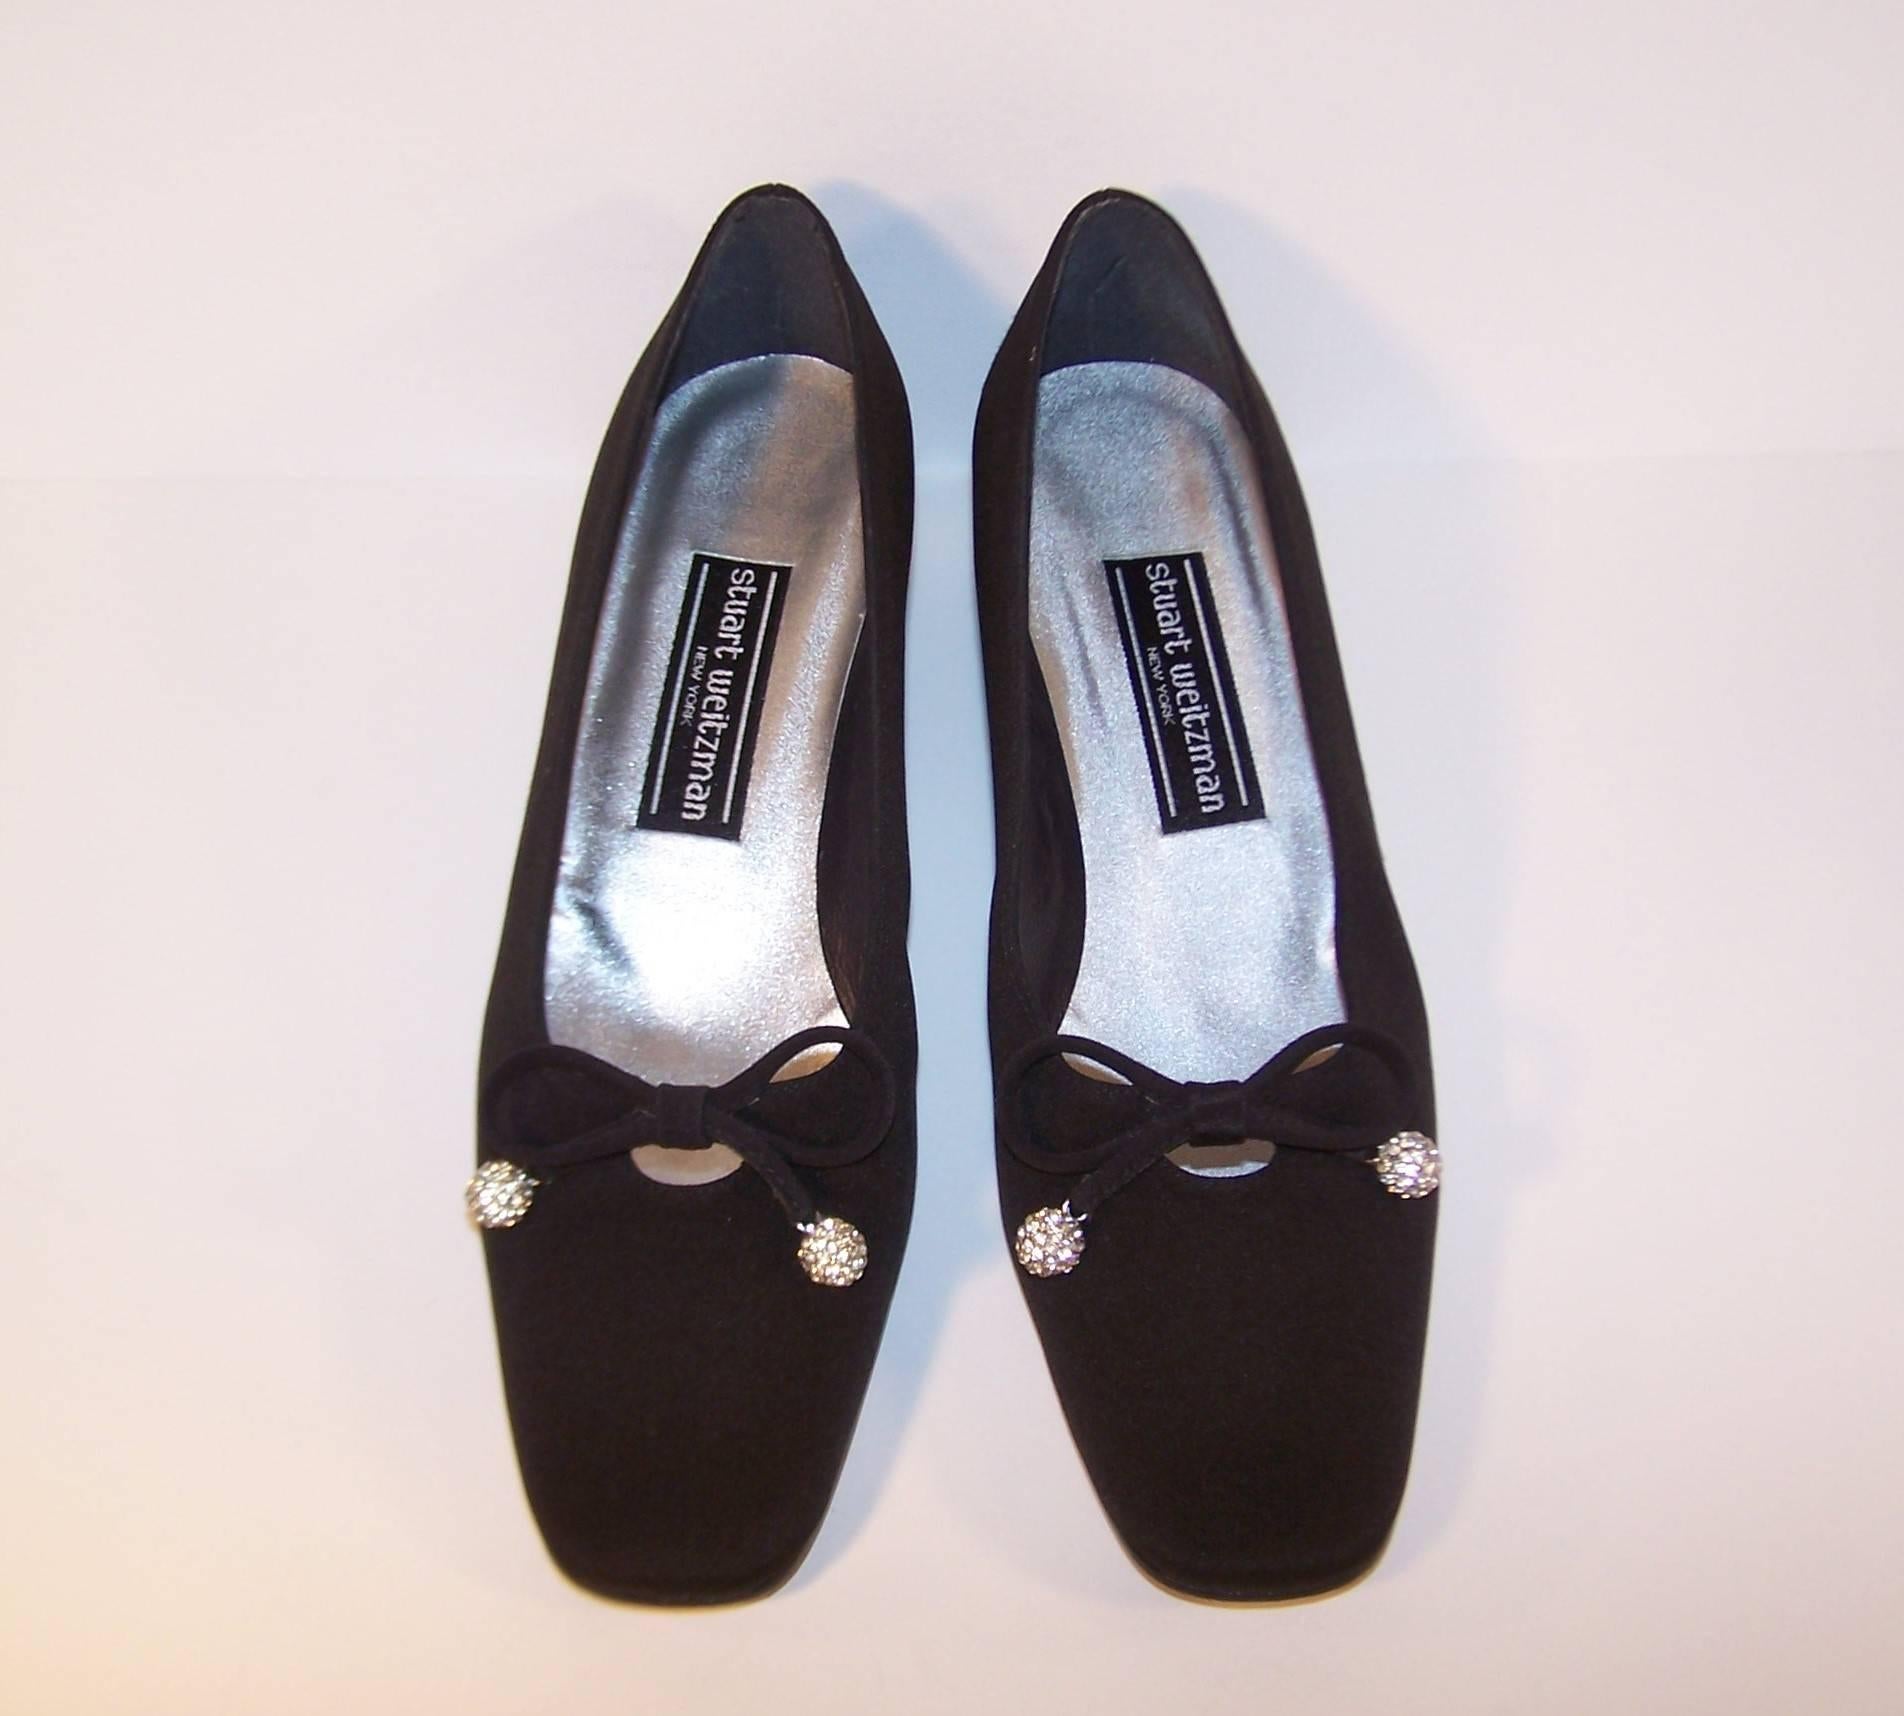 The high heeled evening shoe has a well deserved place in every wardrobe but these classic evening slip-ons by Stuart Weitzman will be your favorite 'go to' option for comfort without sacrificing style.  The black faille fabric embellished with a